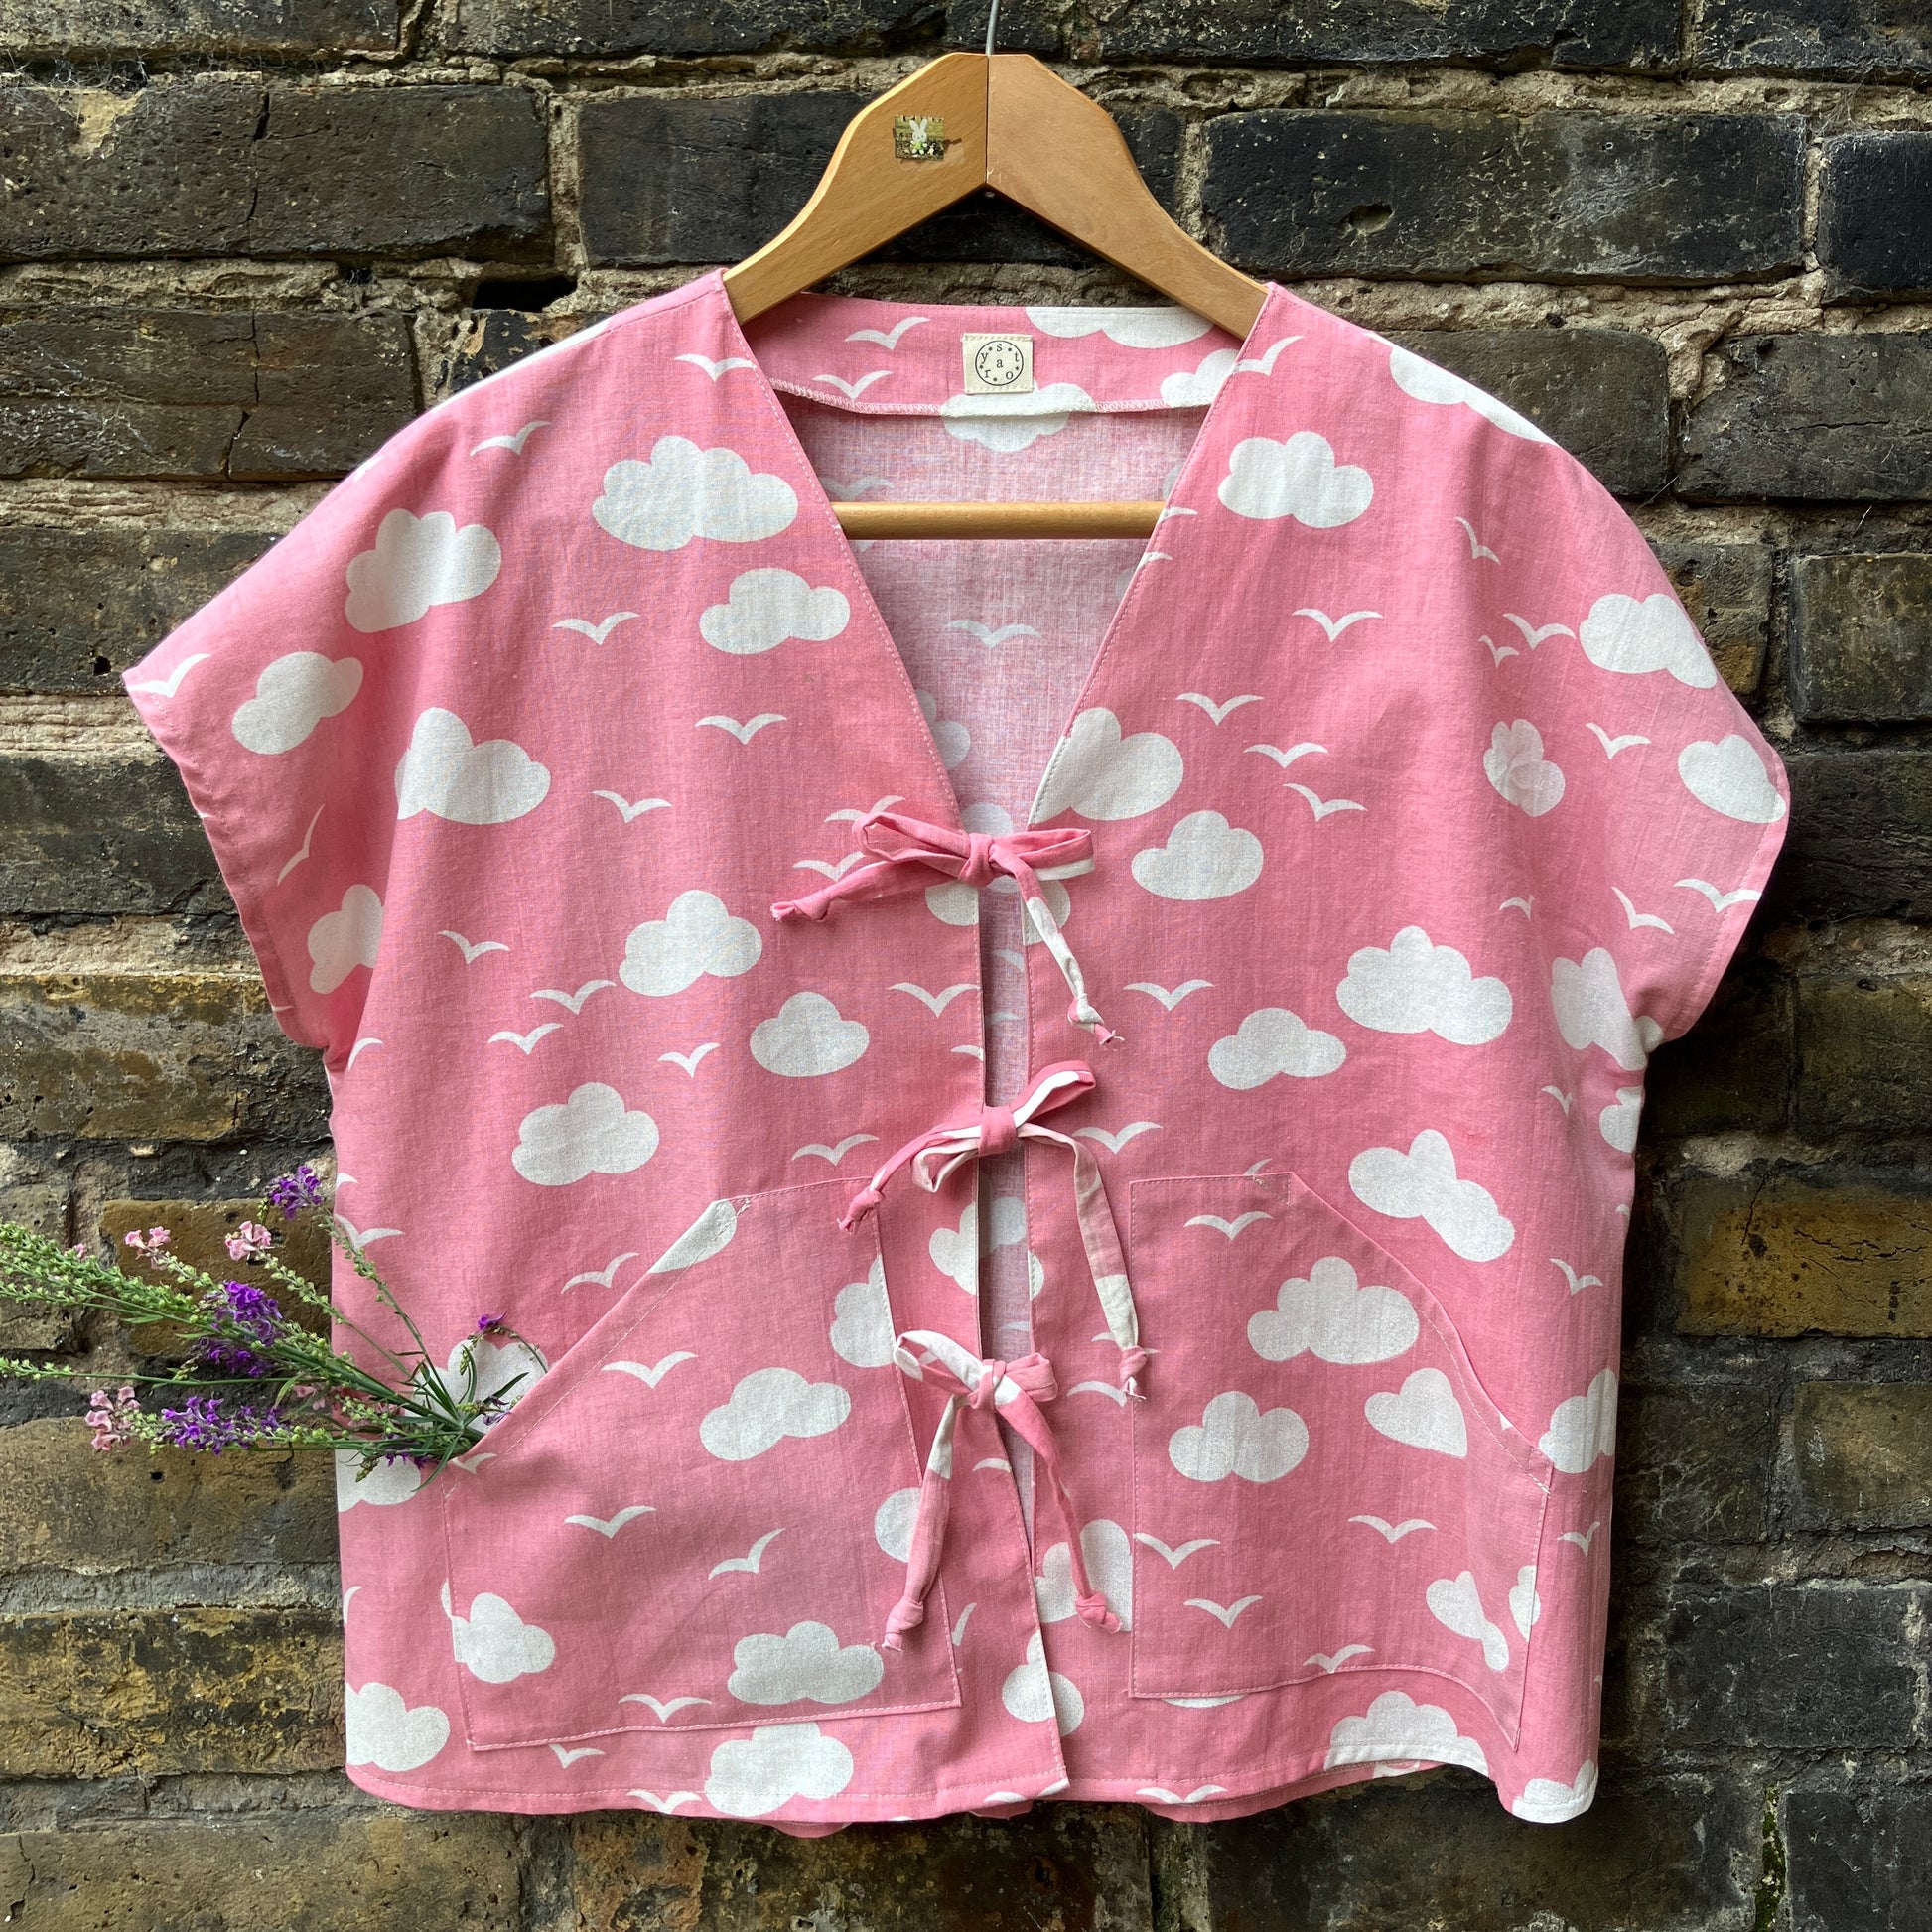 Boxy-fit tie-front top made from a repurposed vintage pink 1980s cloud-print curtain